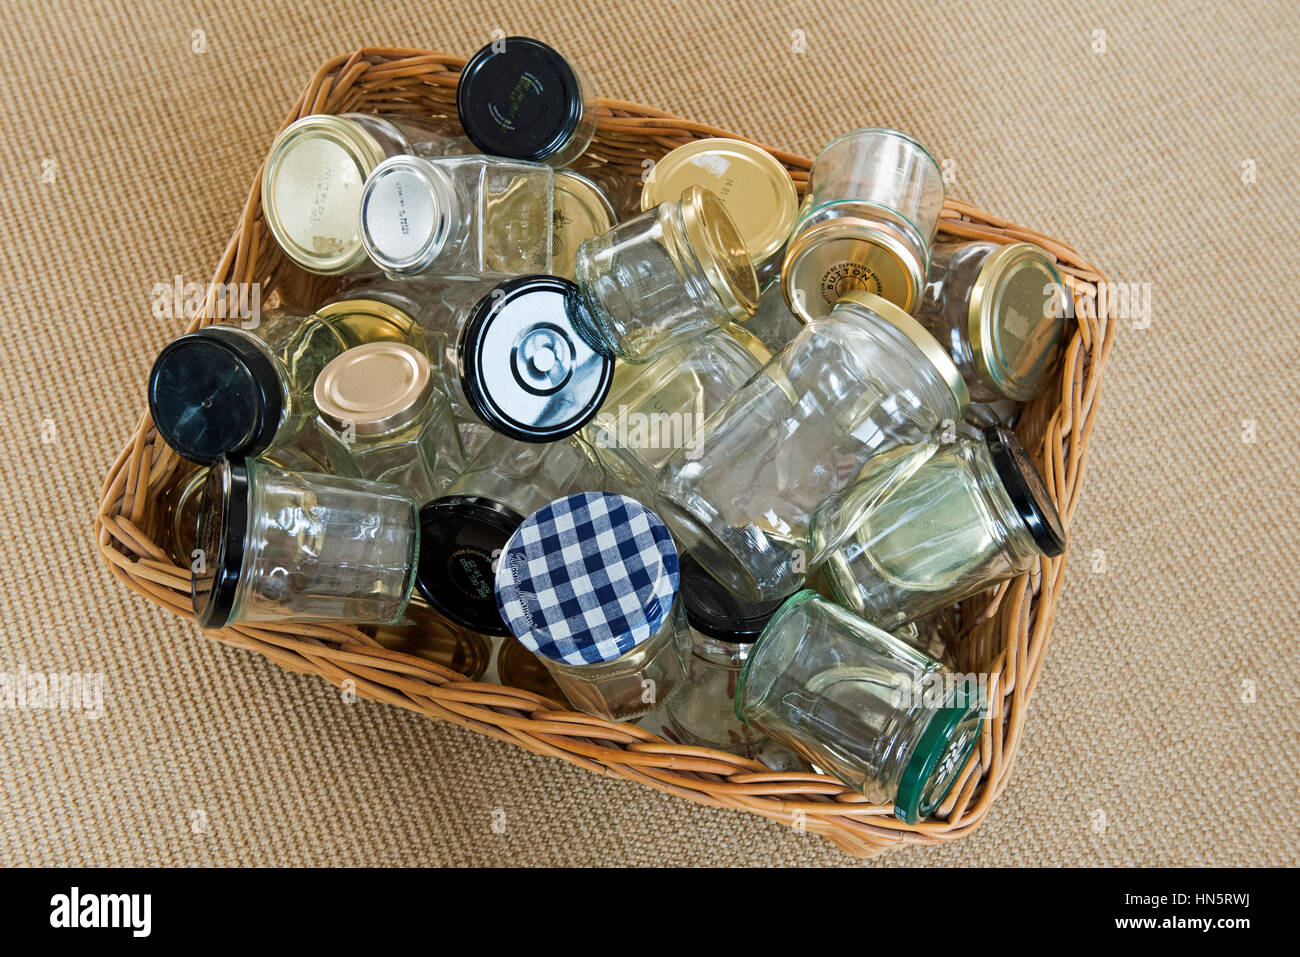 Empty glass jars with lids in wicker basket washed and ready for reuse, storage or recycling. Stock Photo